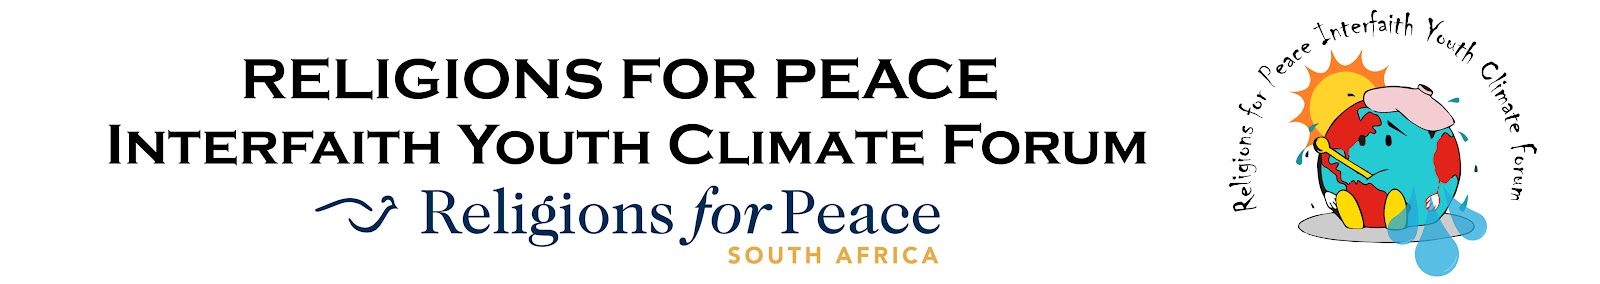 Religions for Peace Interfaith Youth Climate Forum